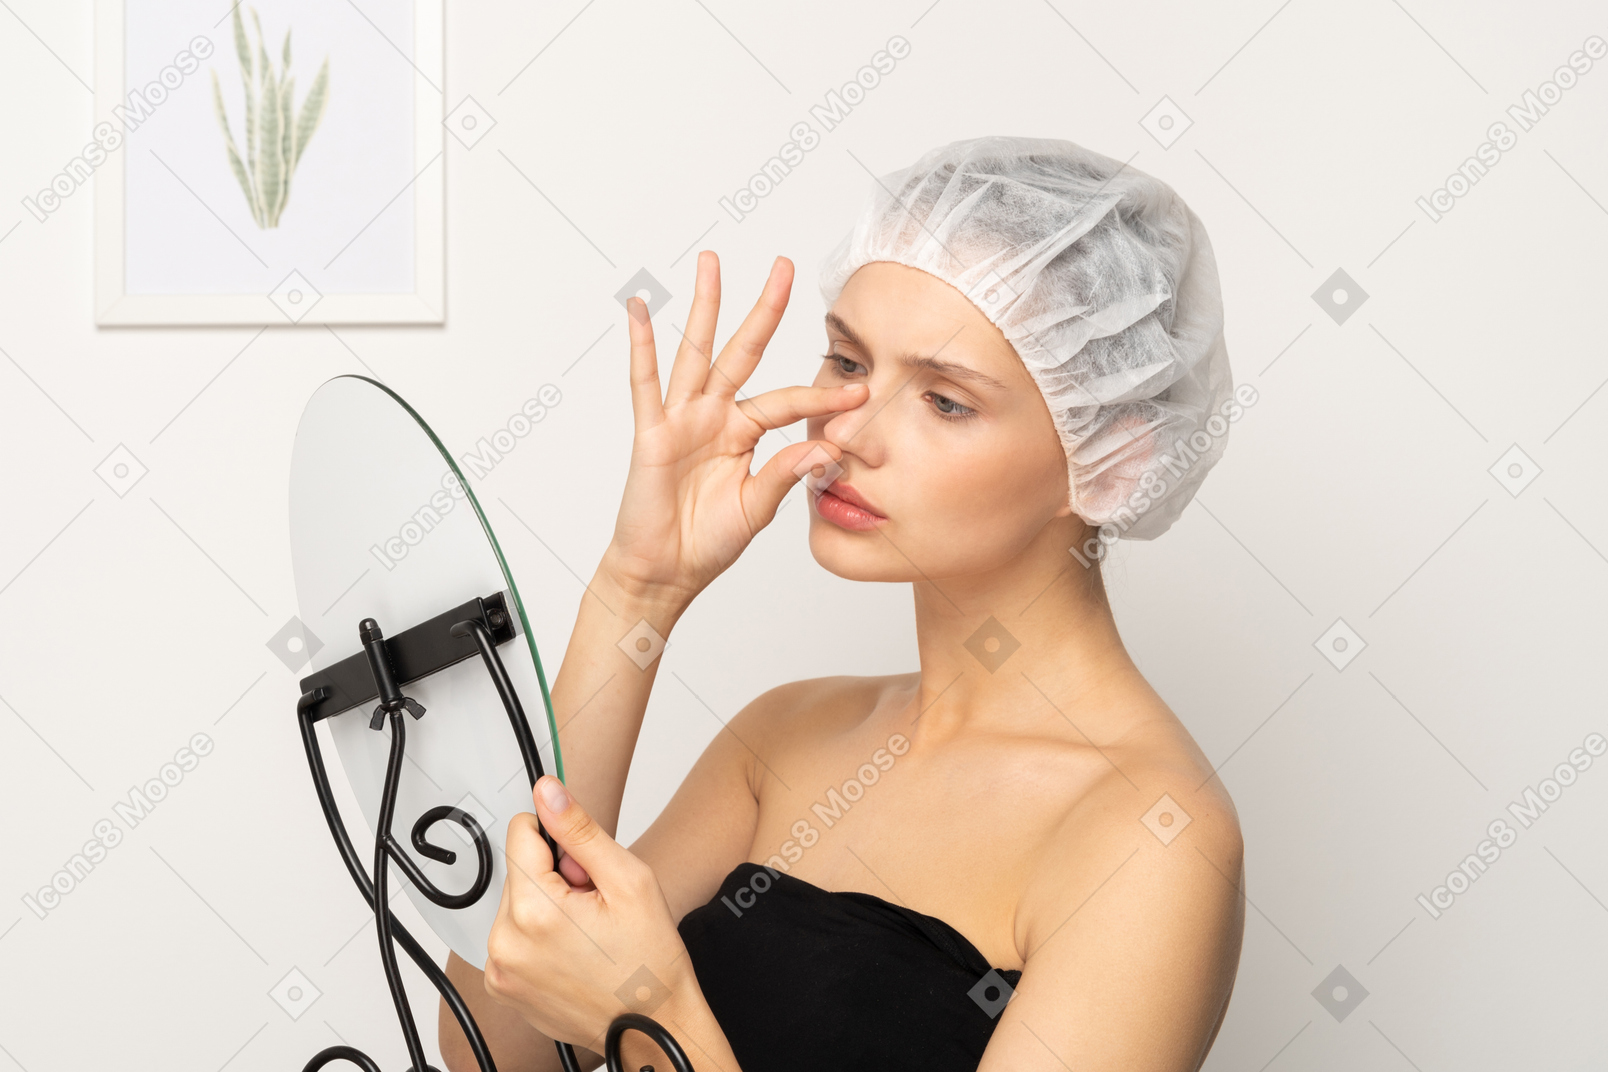 Unhappy young woman looking in the mirror and touching her nose